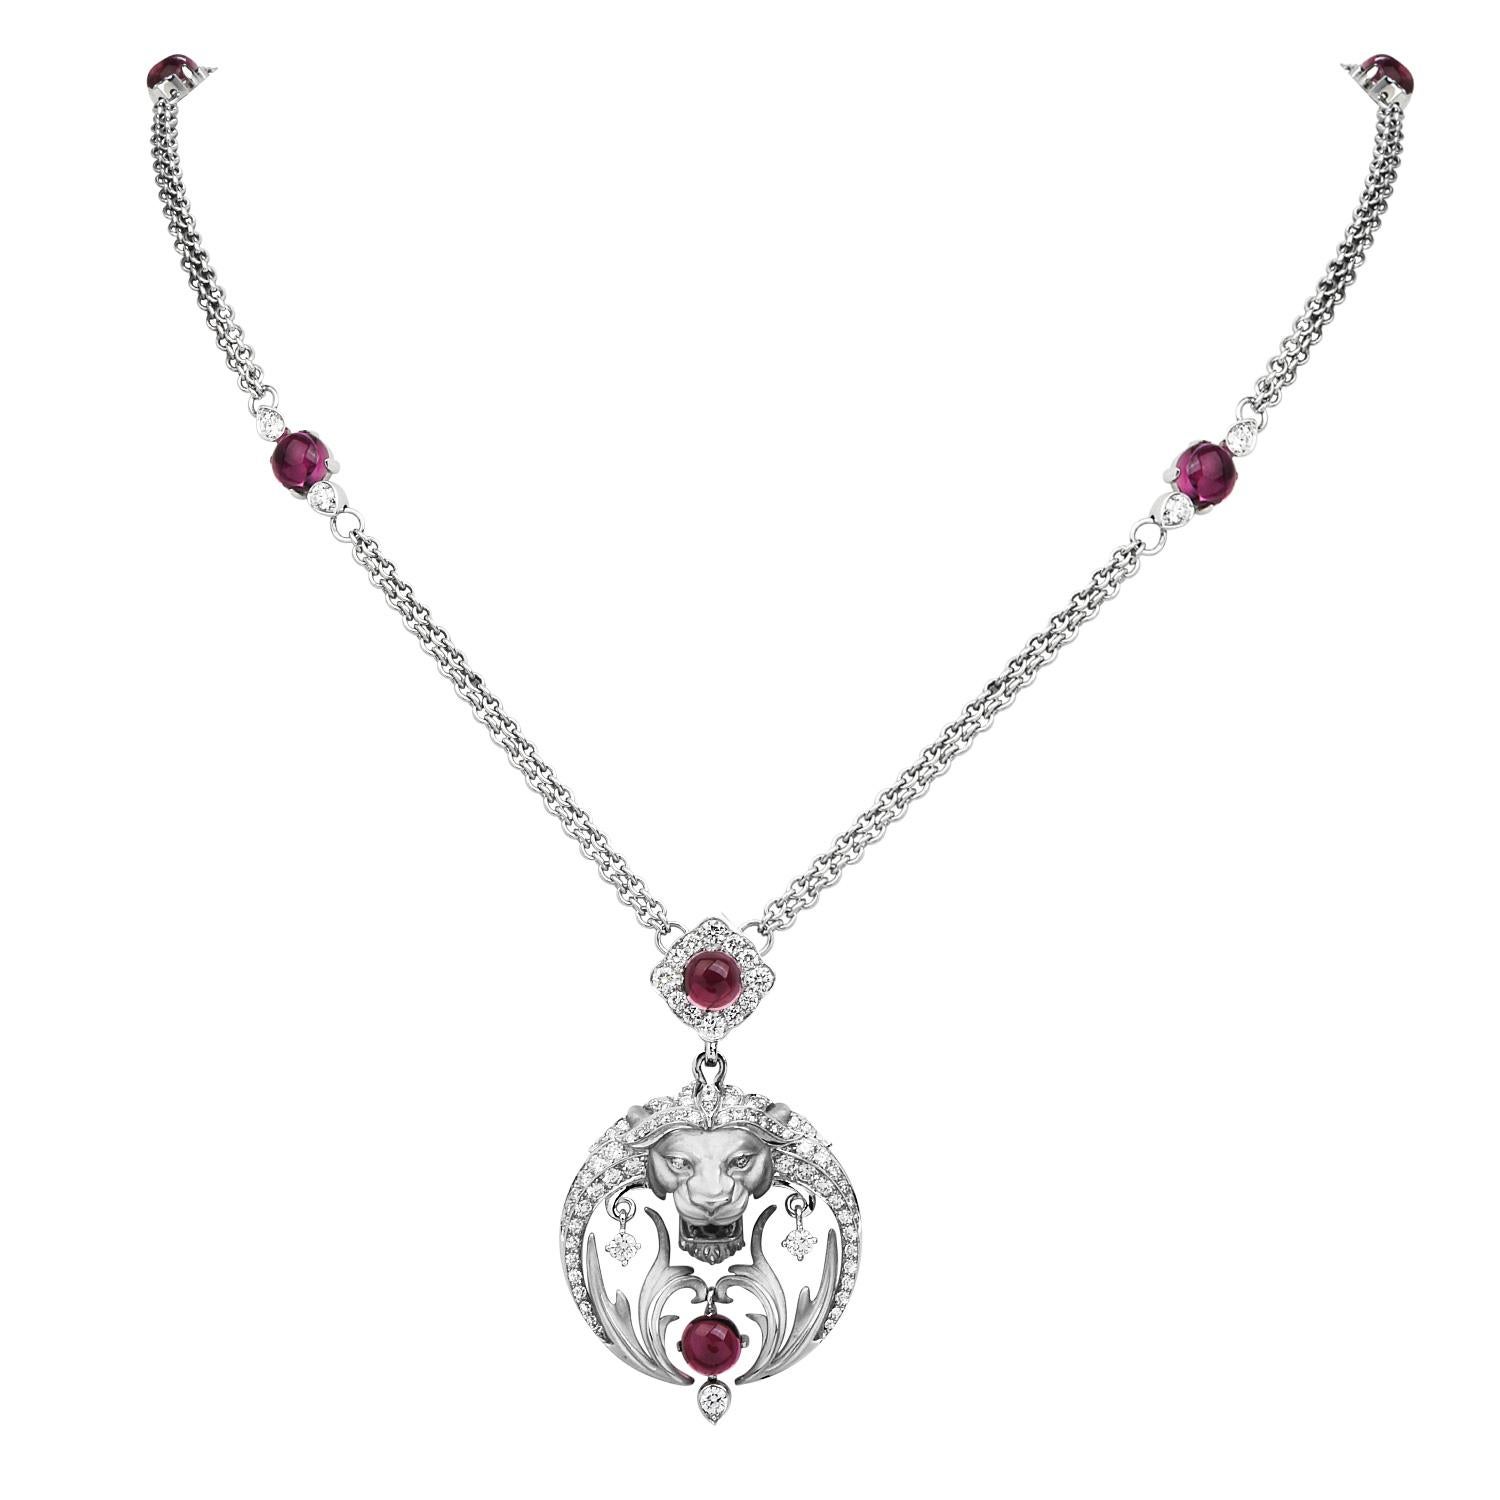 The Margerit Spanish brand, from their Babylon Collection, here is the floating garden necklace.

Inspired in a panther floating motif style pendant, with a double link chain style necklace.

Crafted in solid 18K white gold, enhanced by round-cut,